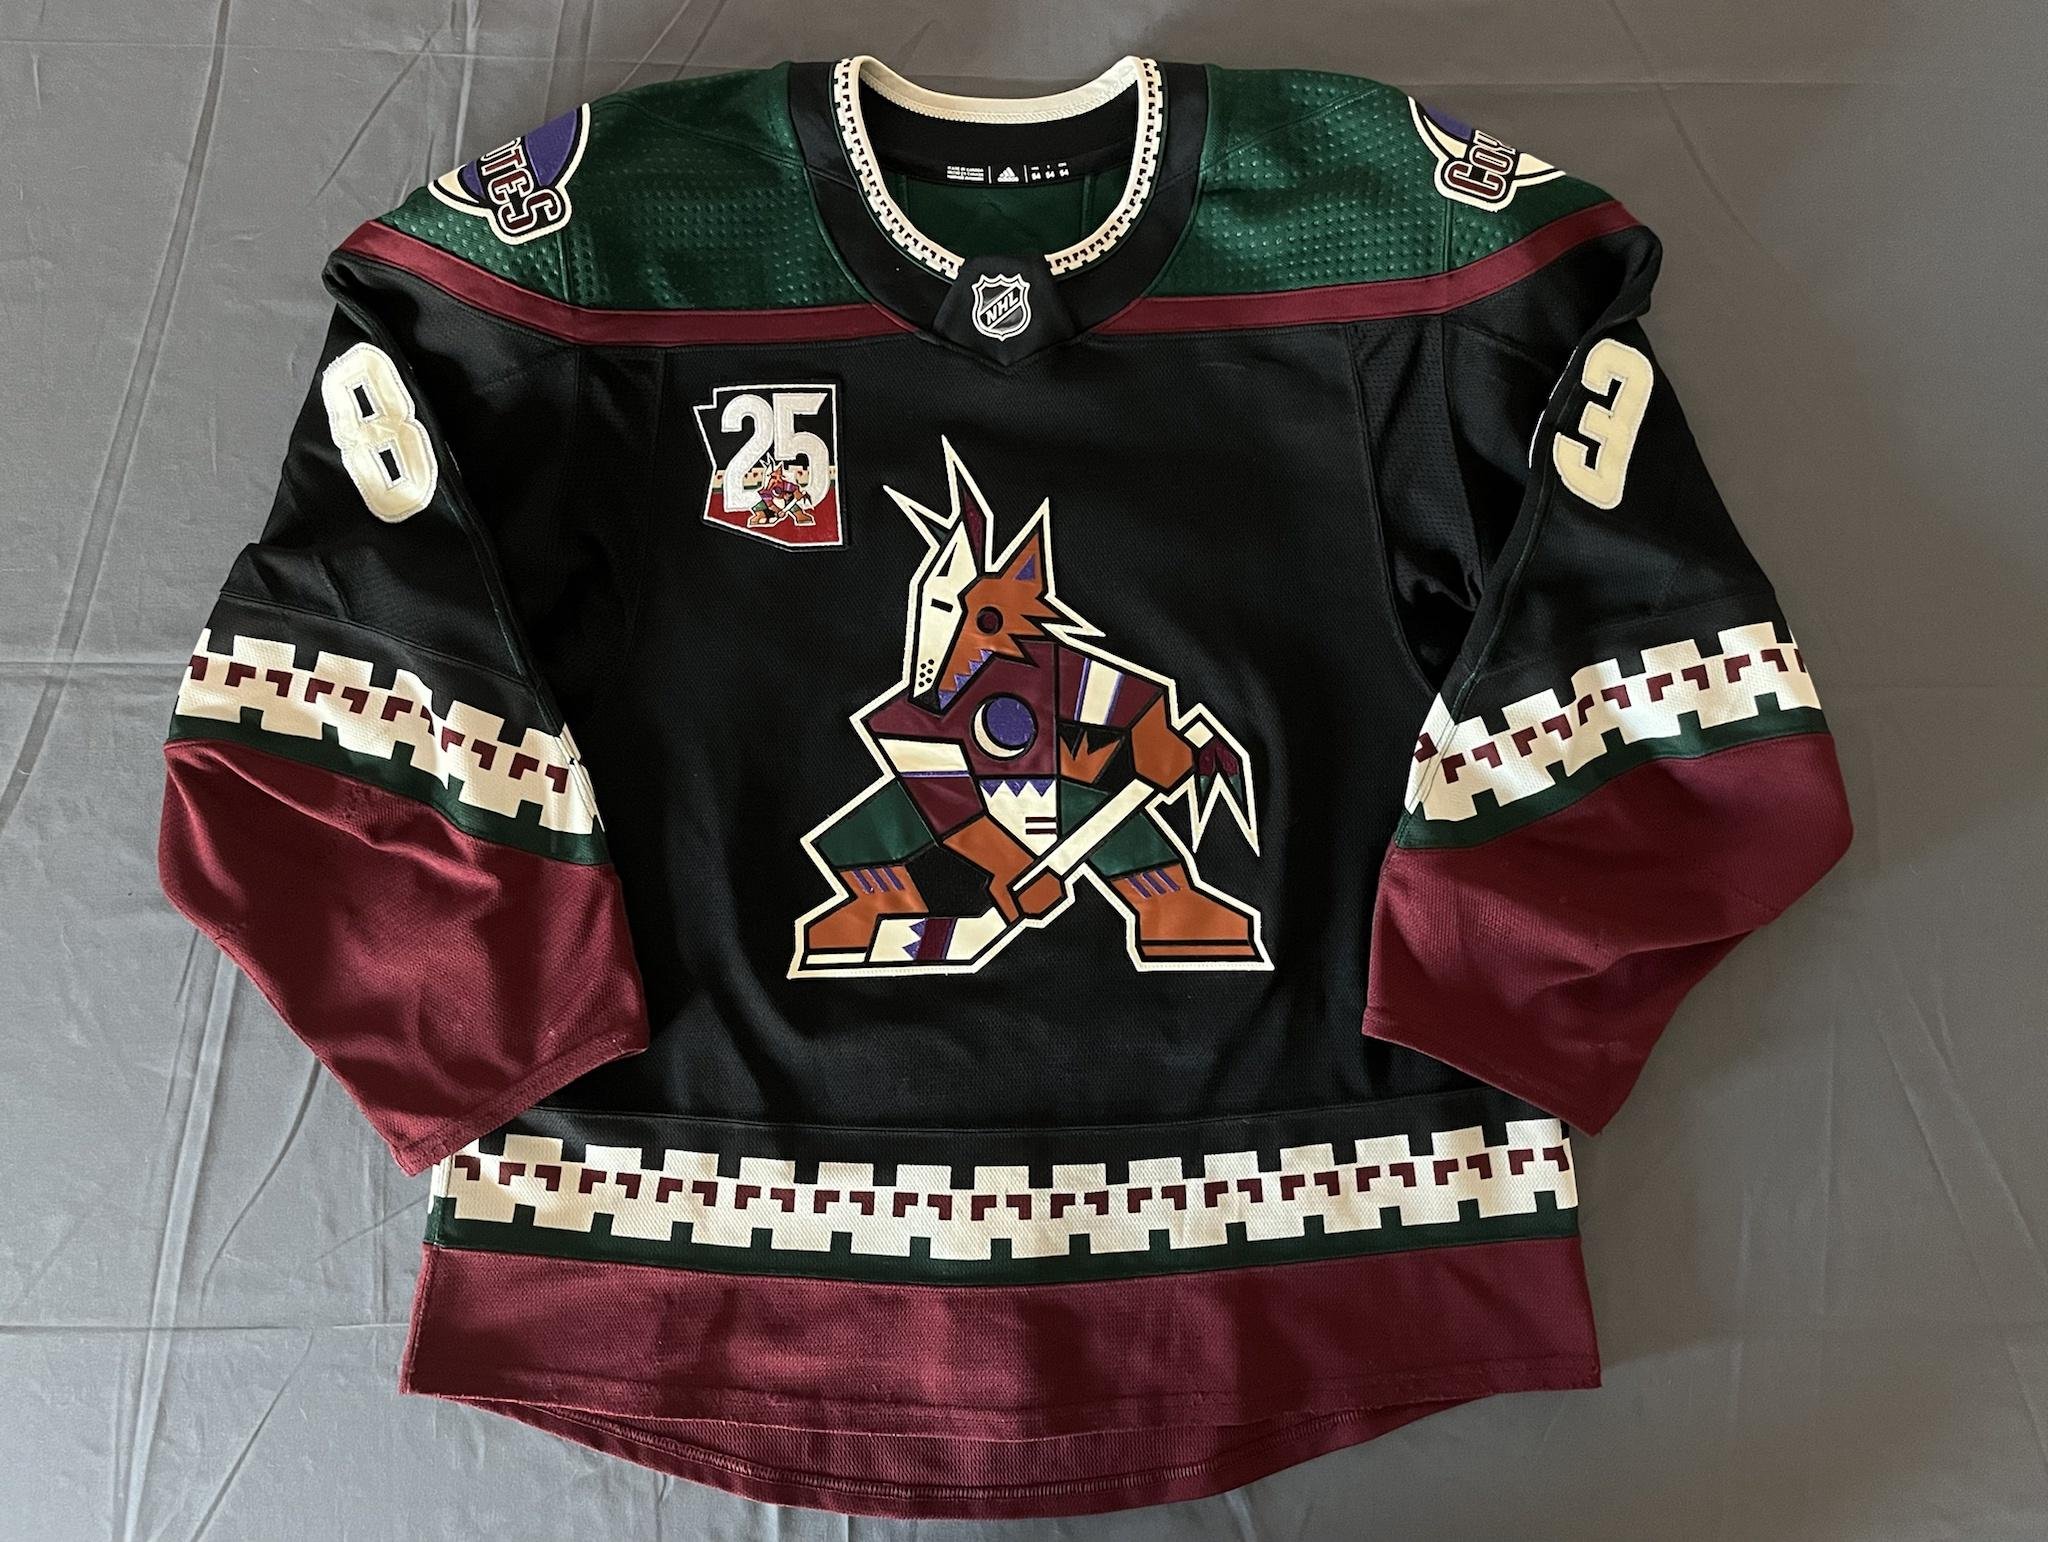 Tucson Roadrunners reveal Coyotes-inspired third jerseys as their official  third jersey